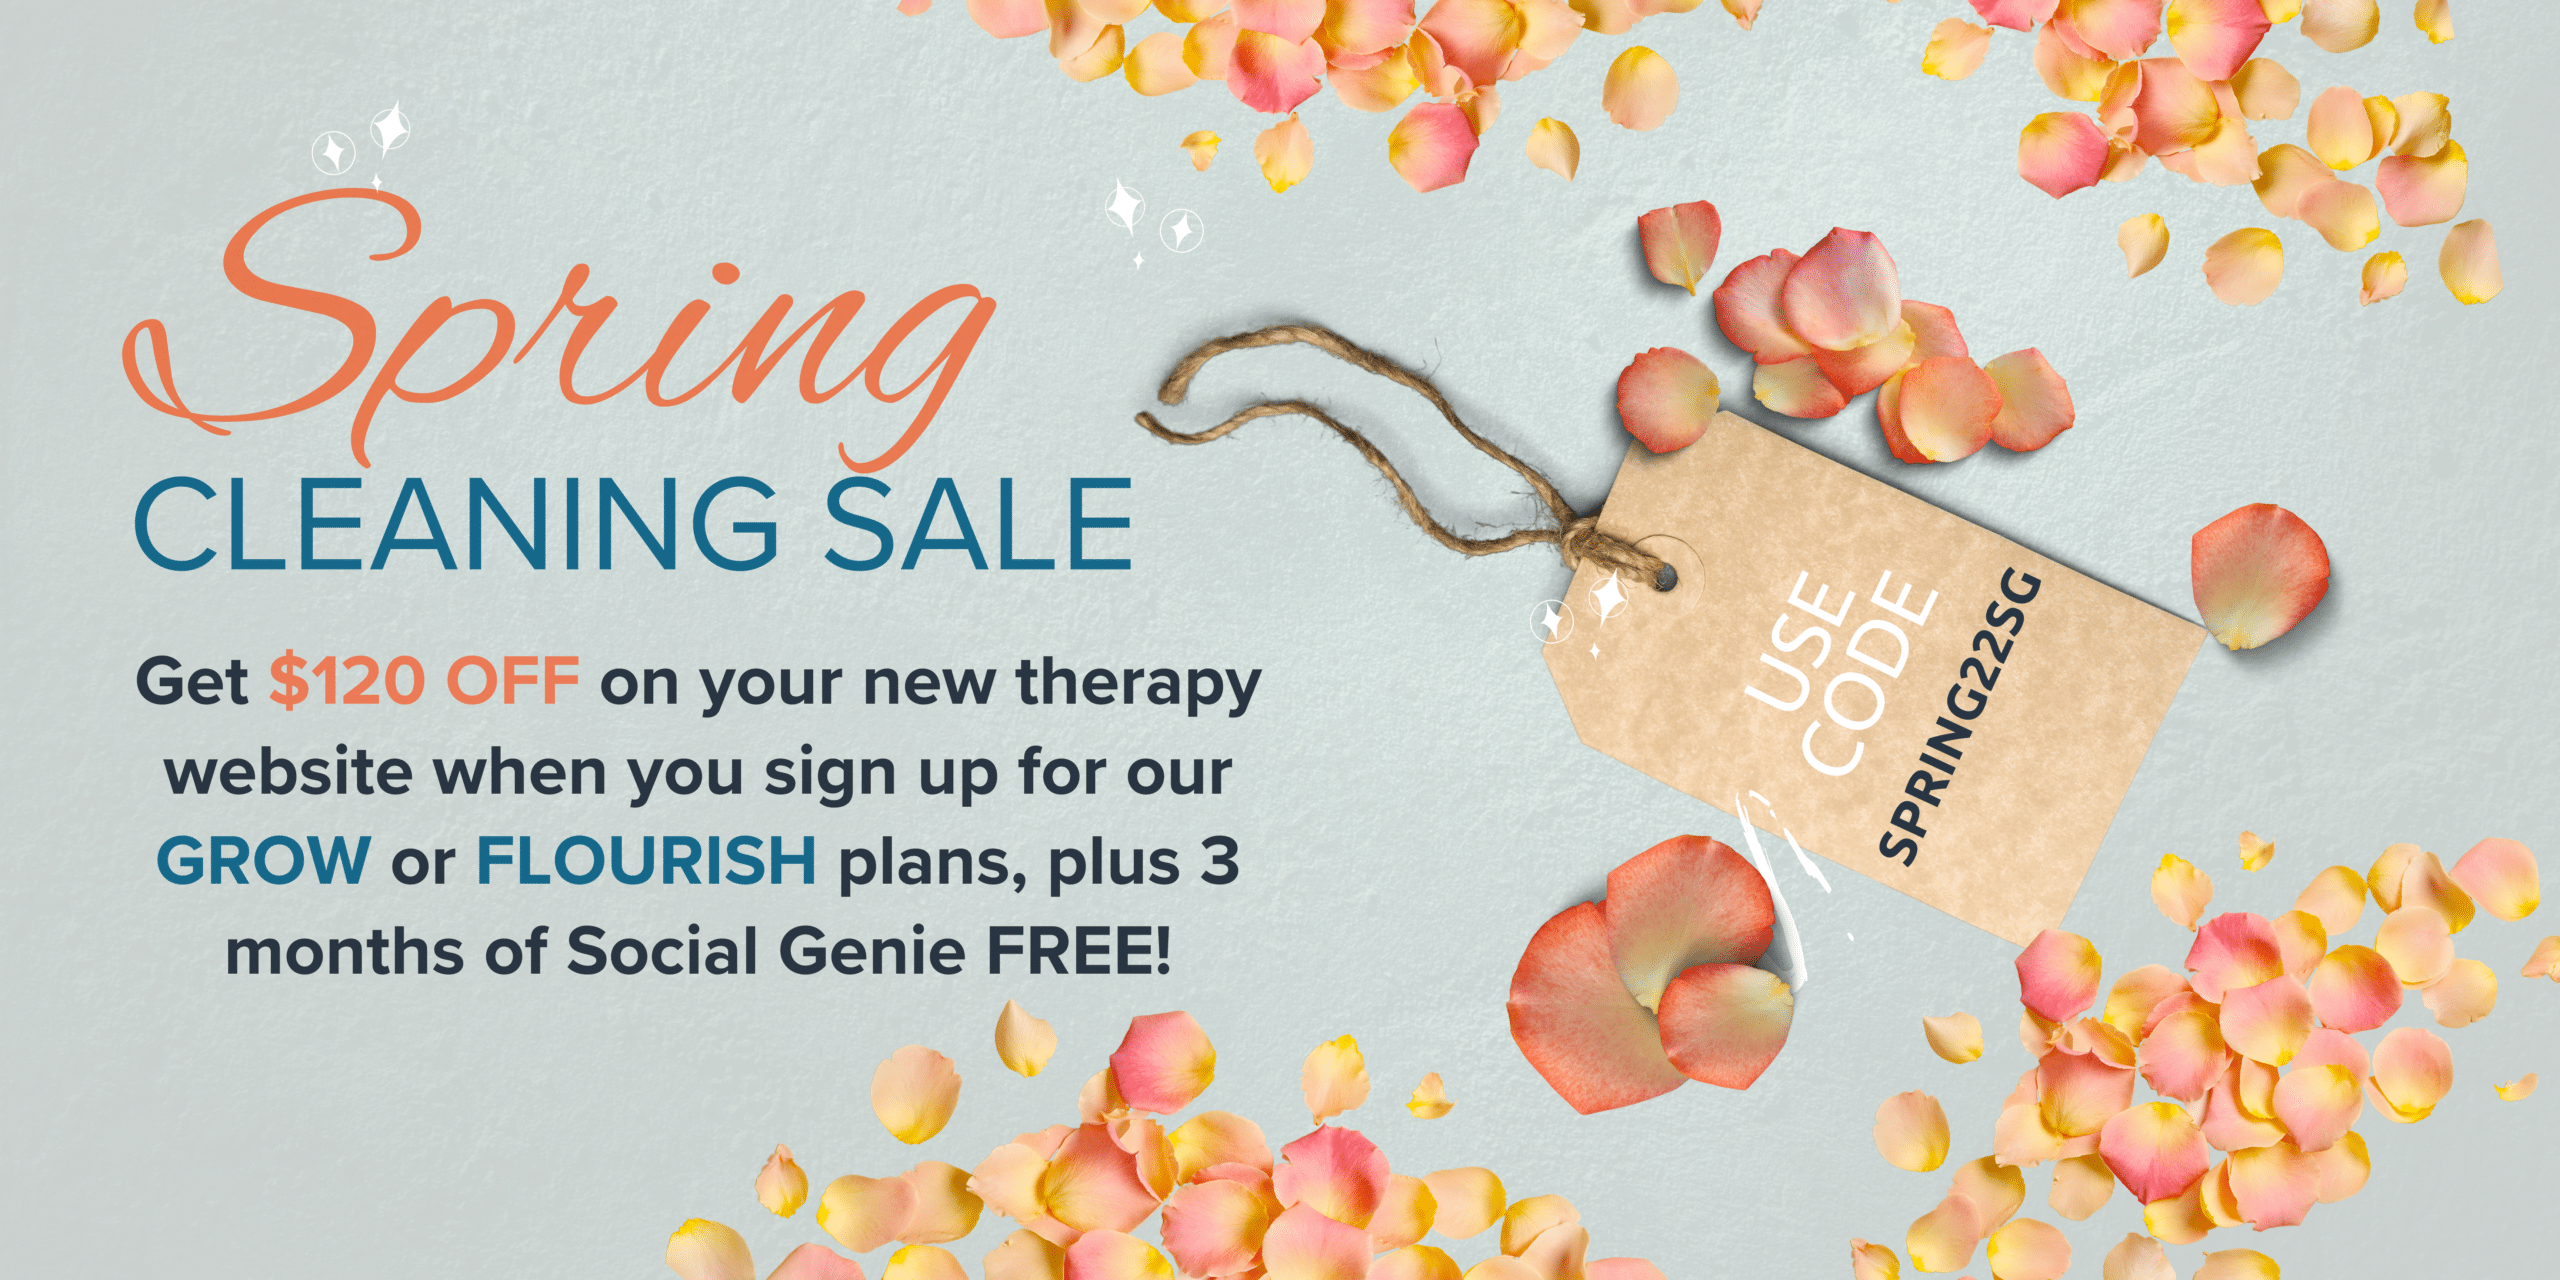 Spring Cleaning Sale | Therapist Websites & Social Media Marketing | Brighter Vision